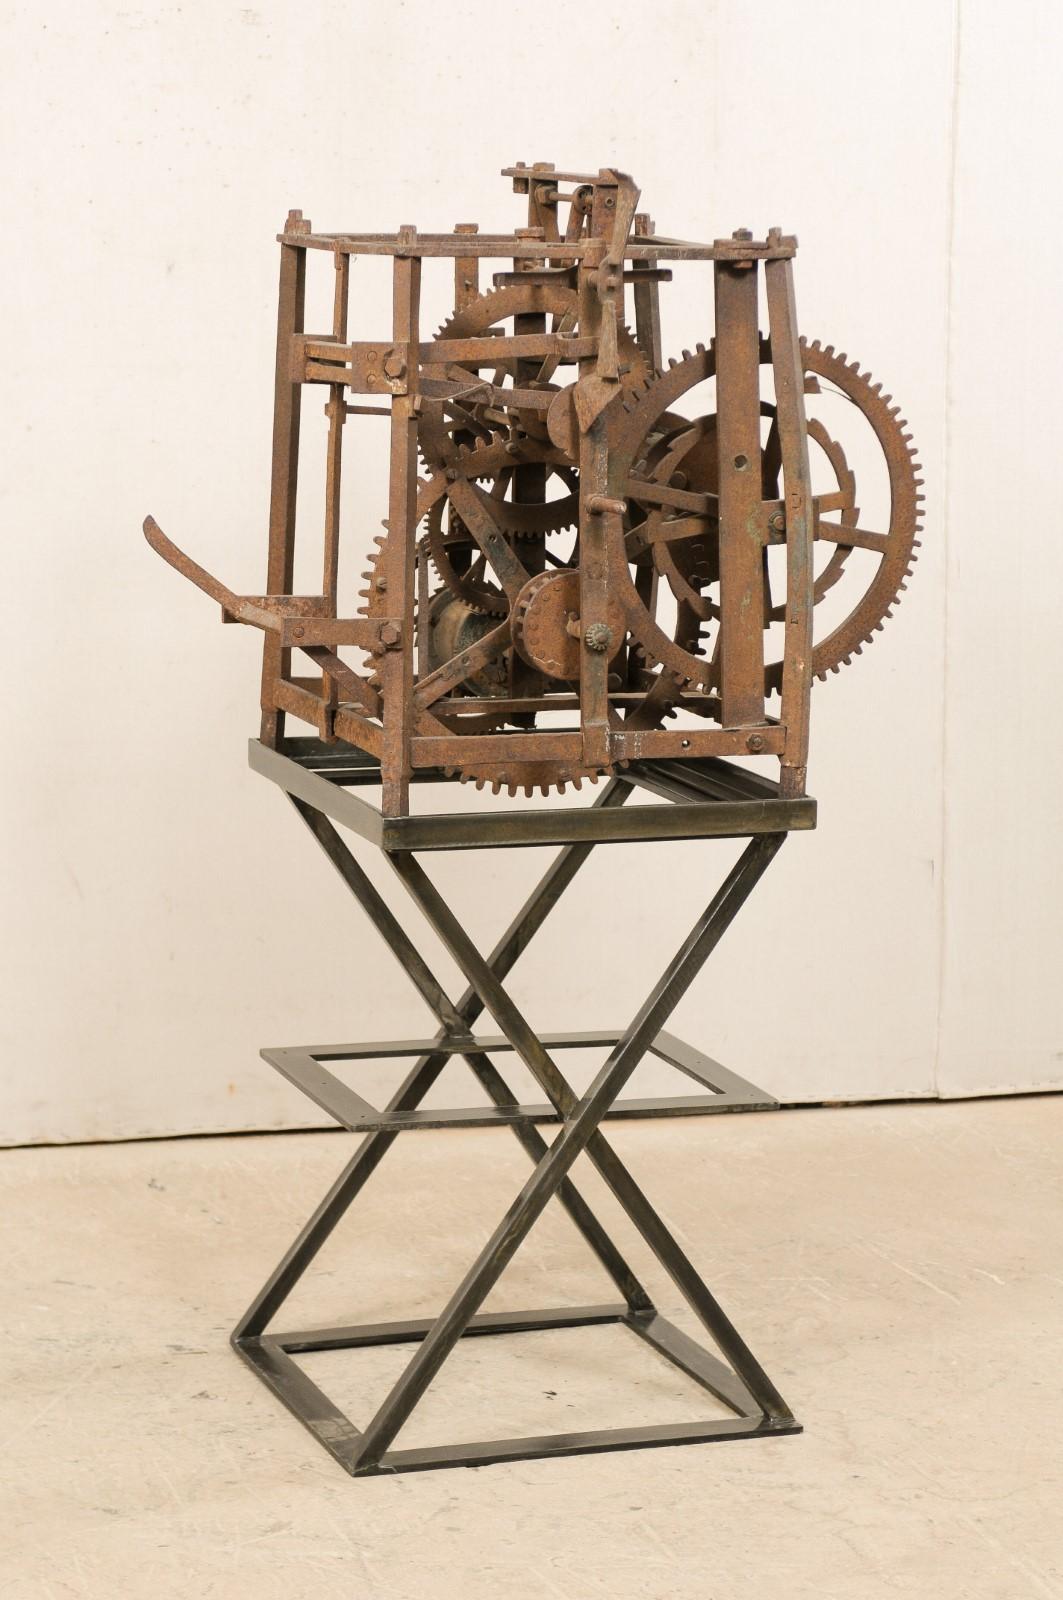 A European clock movement from the late 18th century, displayed on custom iron stand as a modern day art piece. This antique European city clock tower skeleton mechanism is comprised of a series of iron gears and levers, housed together within an